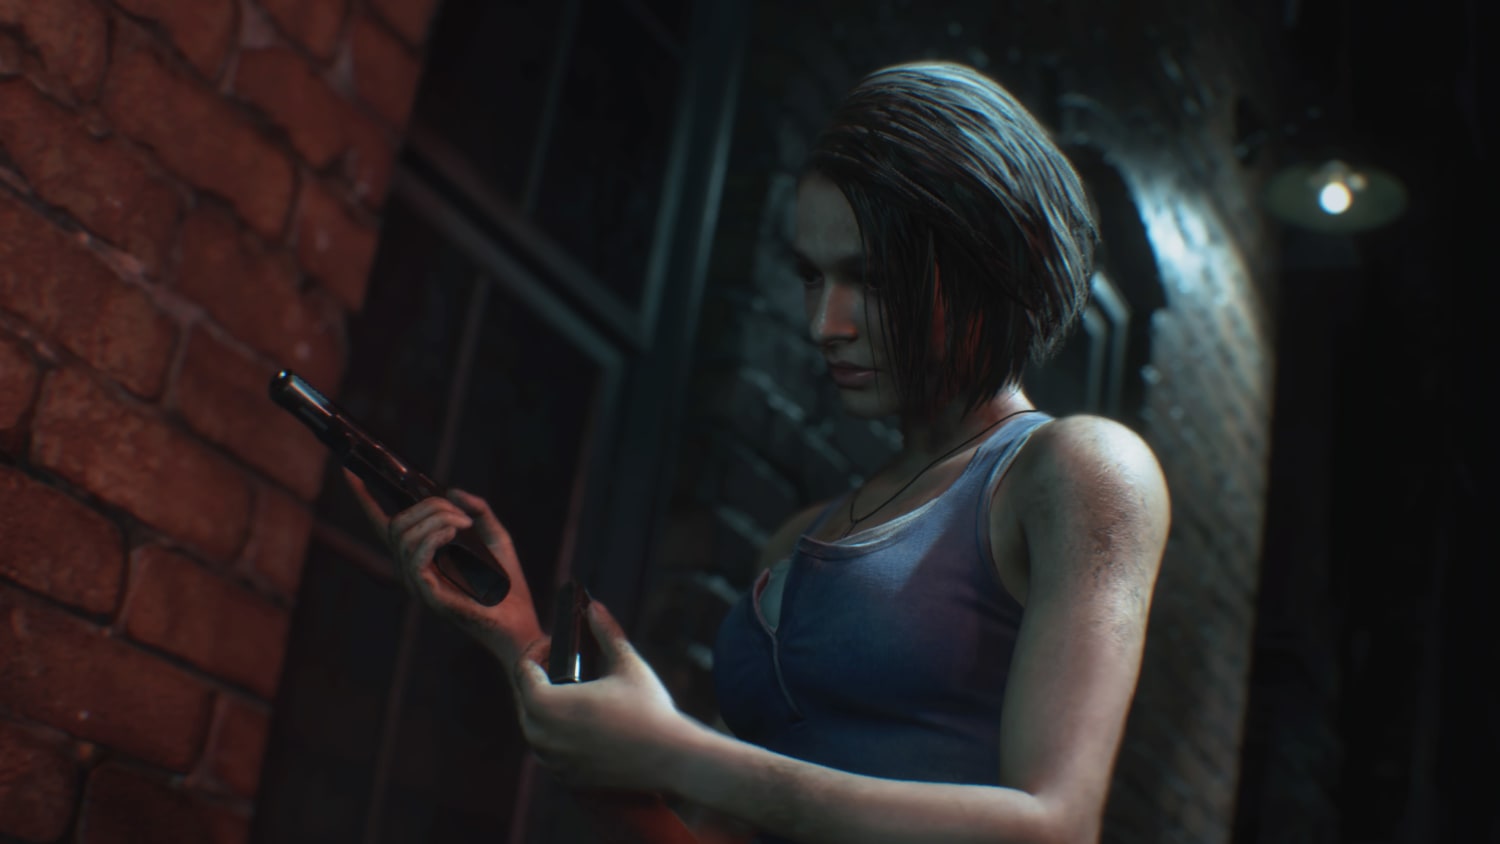 Resident Evil 3 tips: Top 5 you'll need to survive